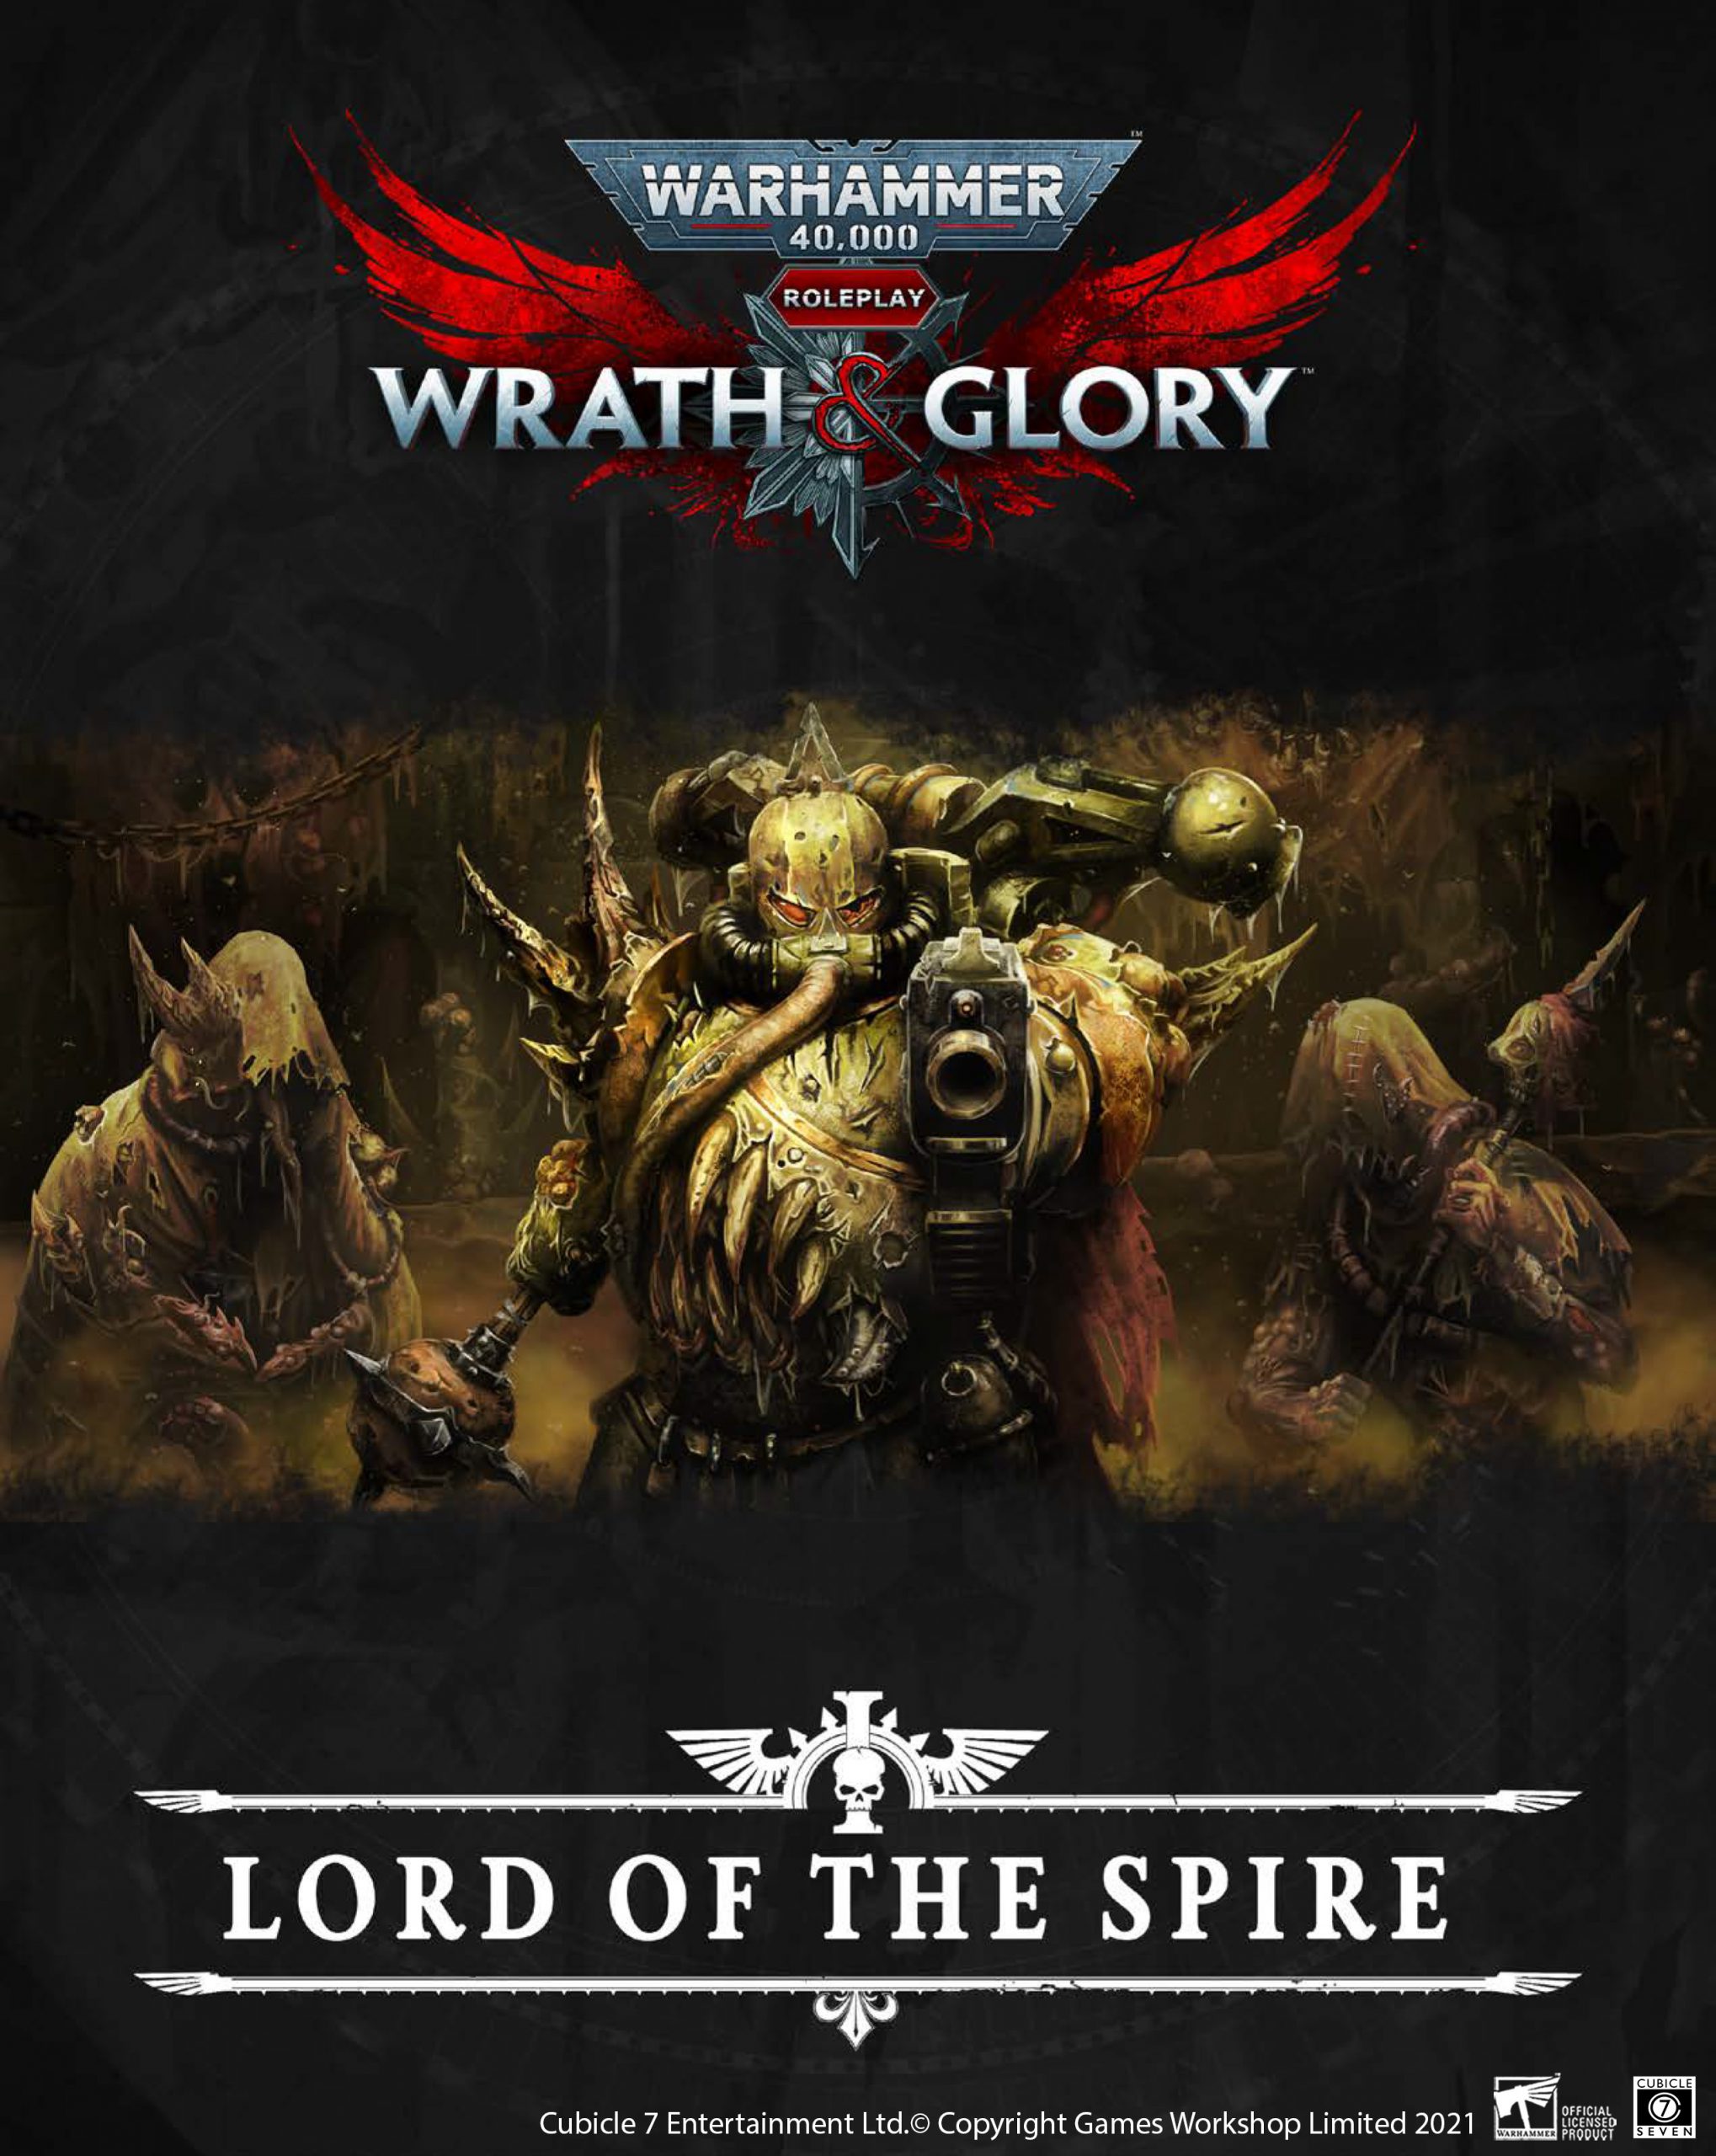 Wrath & Glory: The Lord of the Spire PDF Out Now!